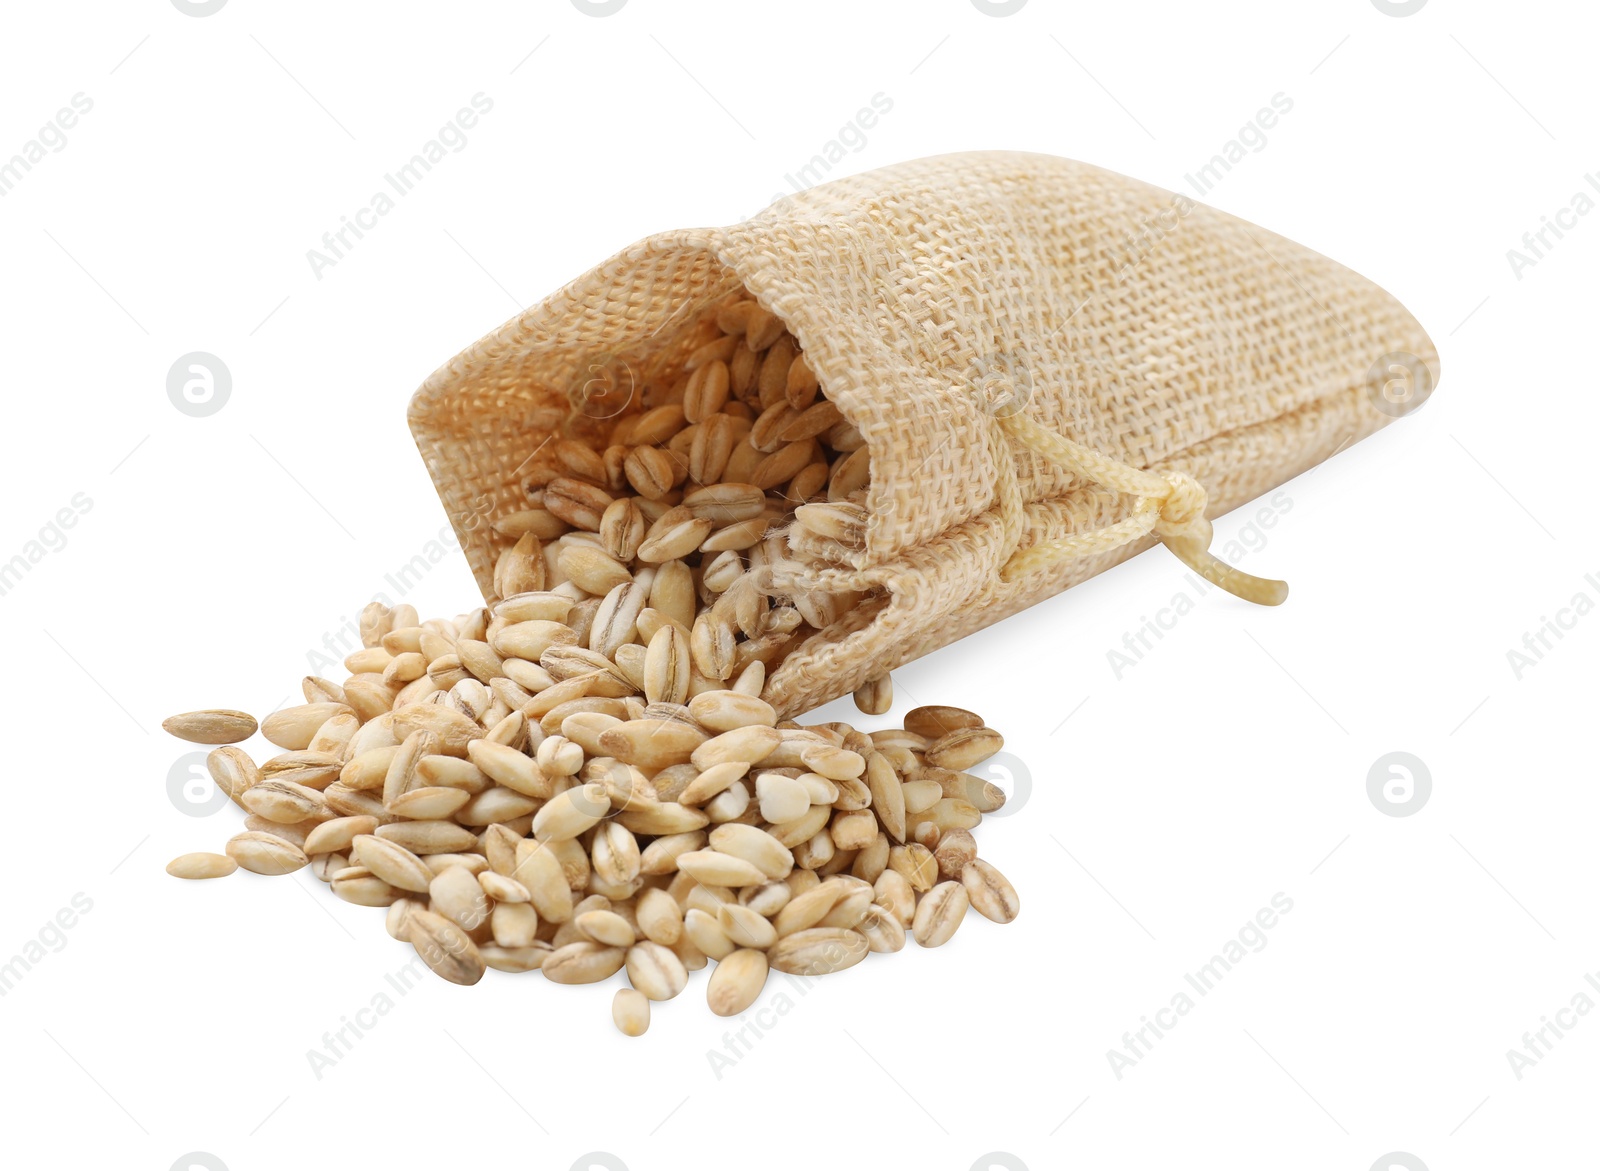 Photo of Burlap bag with raw pearl barley isolated on white